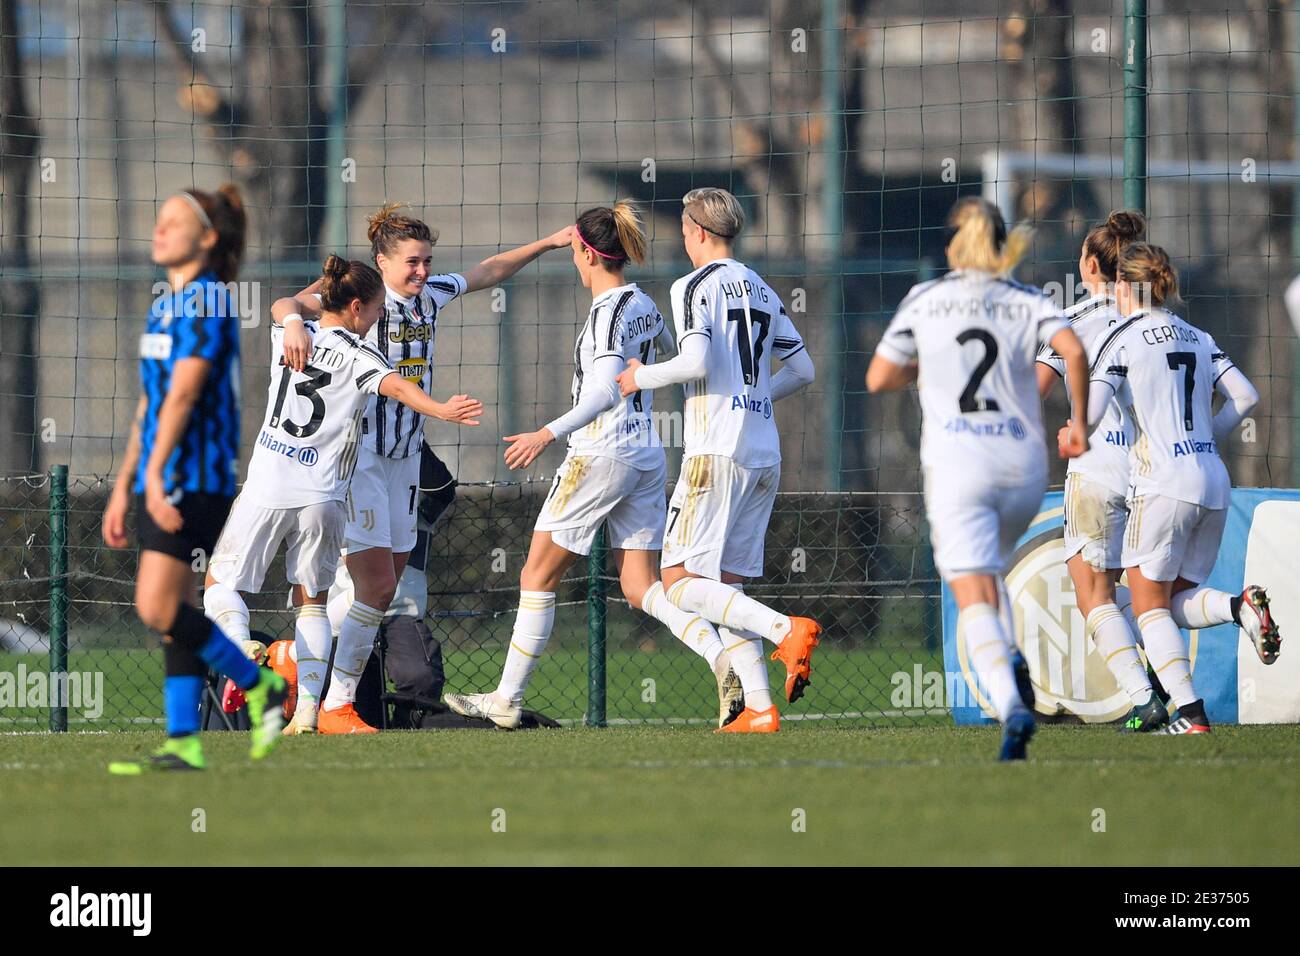 Teammates celebrate Goalkeeper Laura Giuliani (#1 FC Juventus) after  scoreduring the Serie A women's match between FC Inter and FC Juventus at  Suning Sport Center YDC in Milan, Italy Stock Photo - Alamy